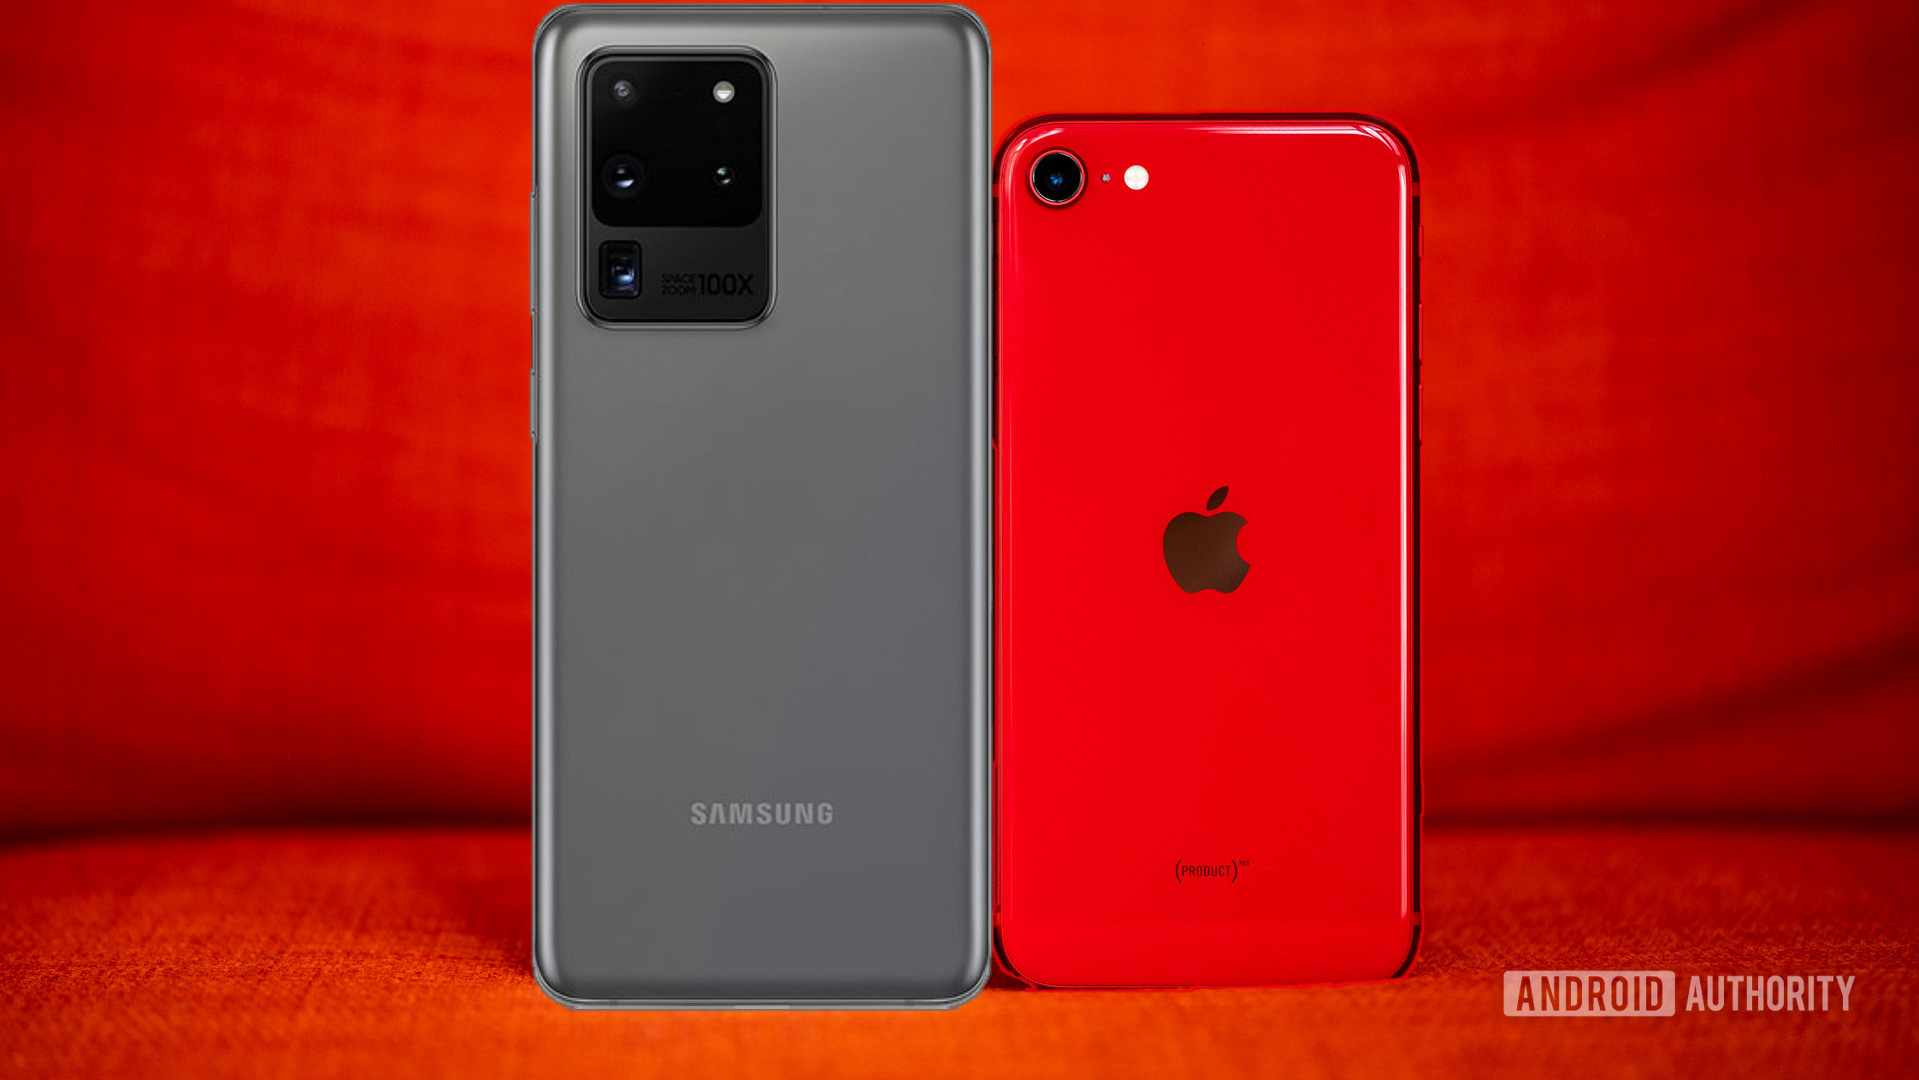 Gray Galaxy S20 Ultra next to Red iPhone